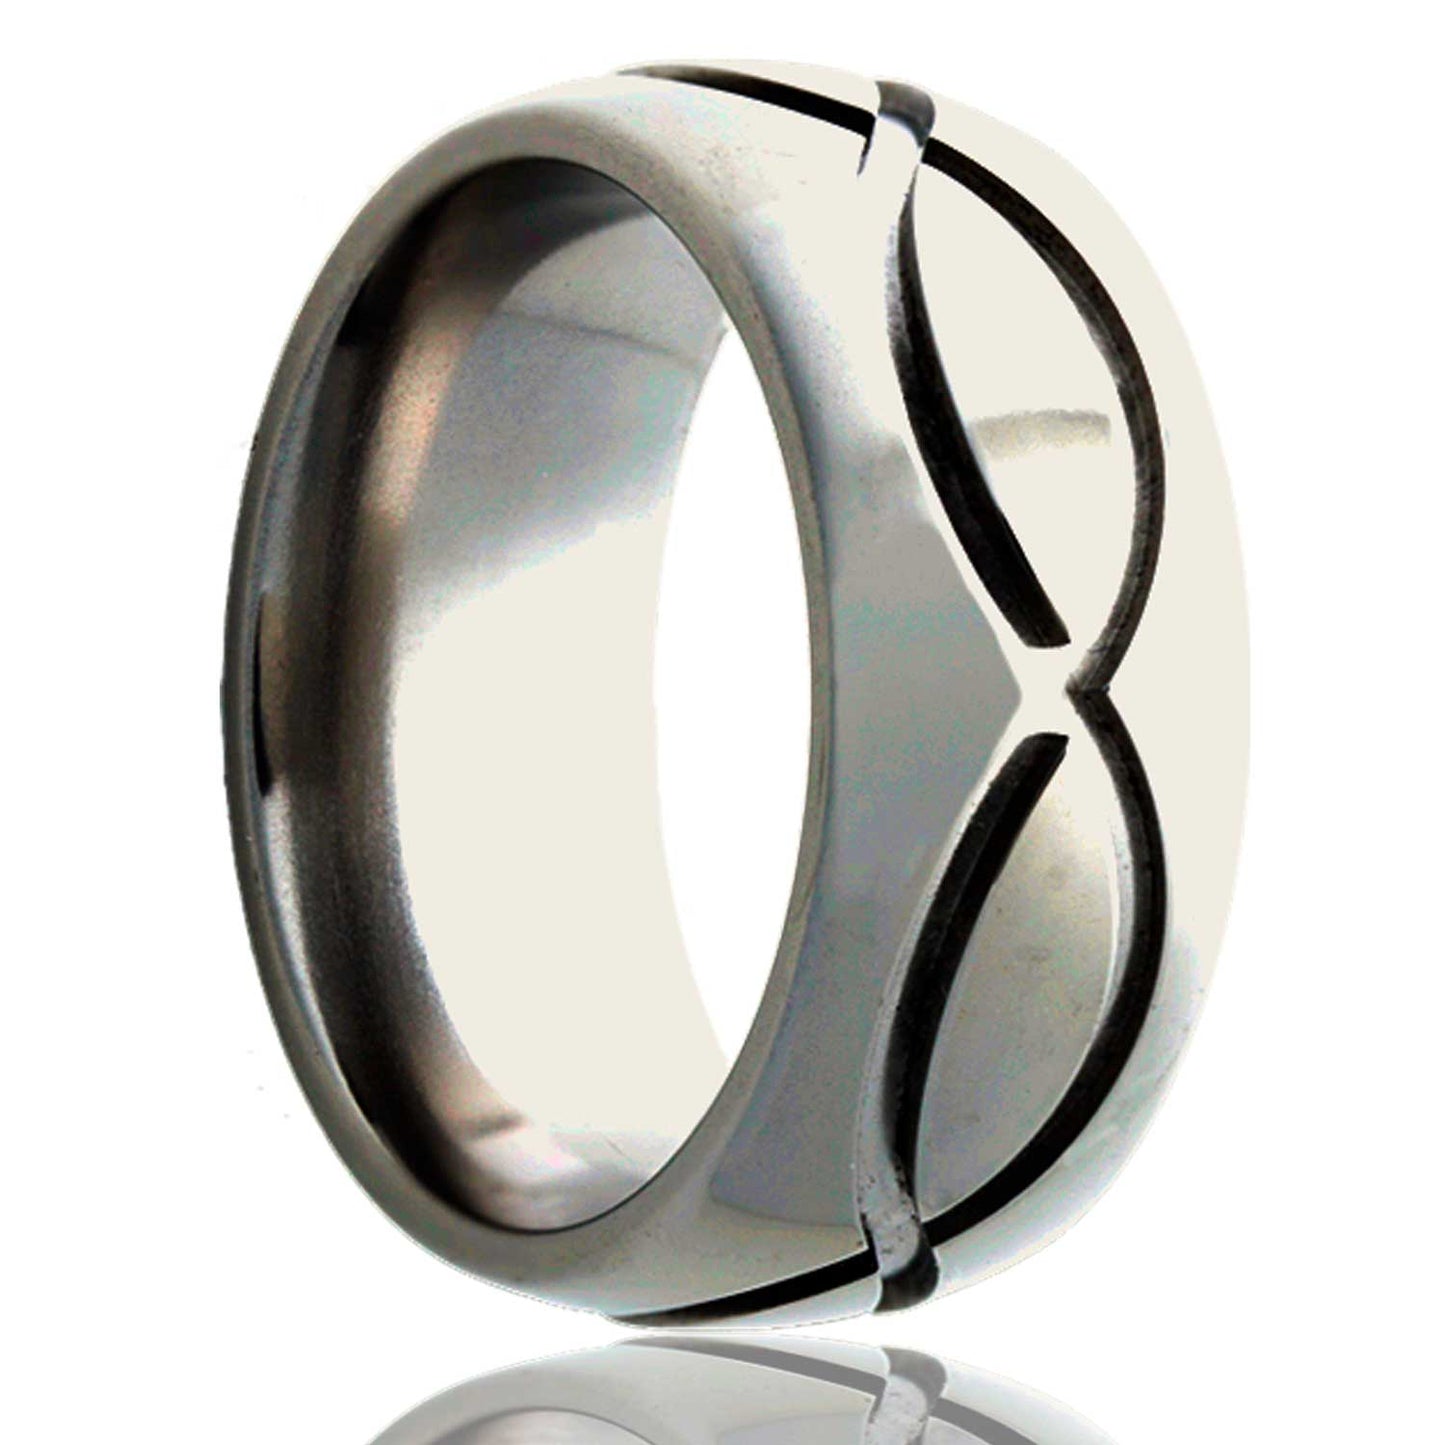 A infinity waves domed titanium wedding band displayed on a neutral white background.